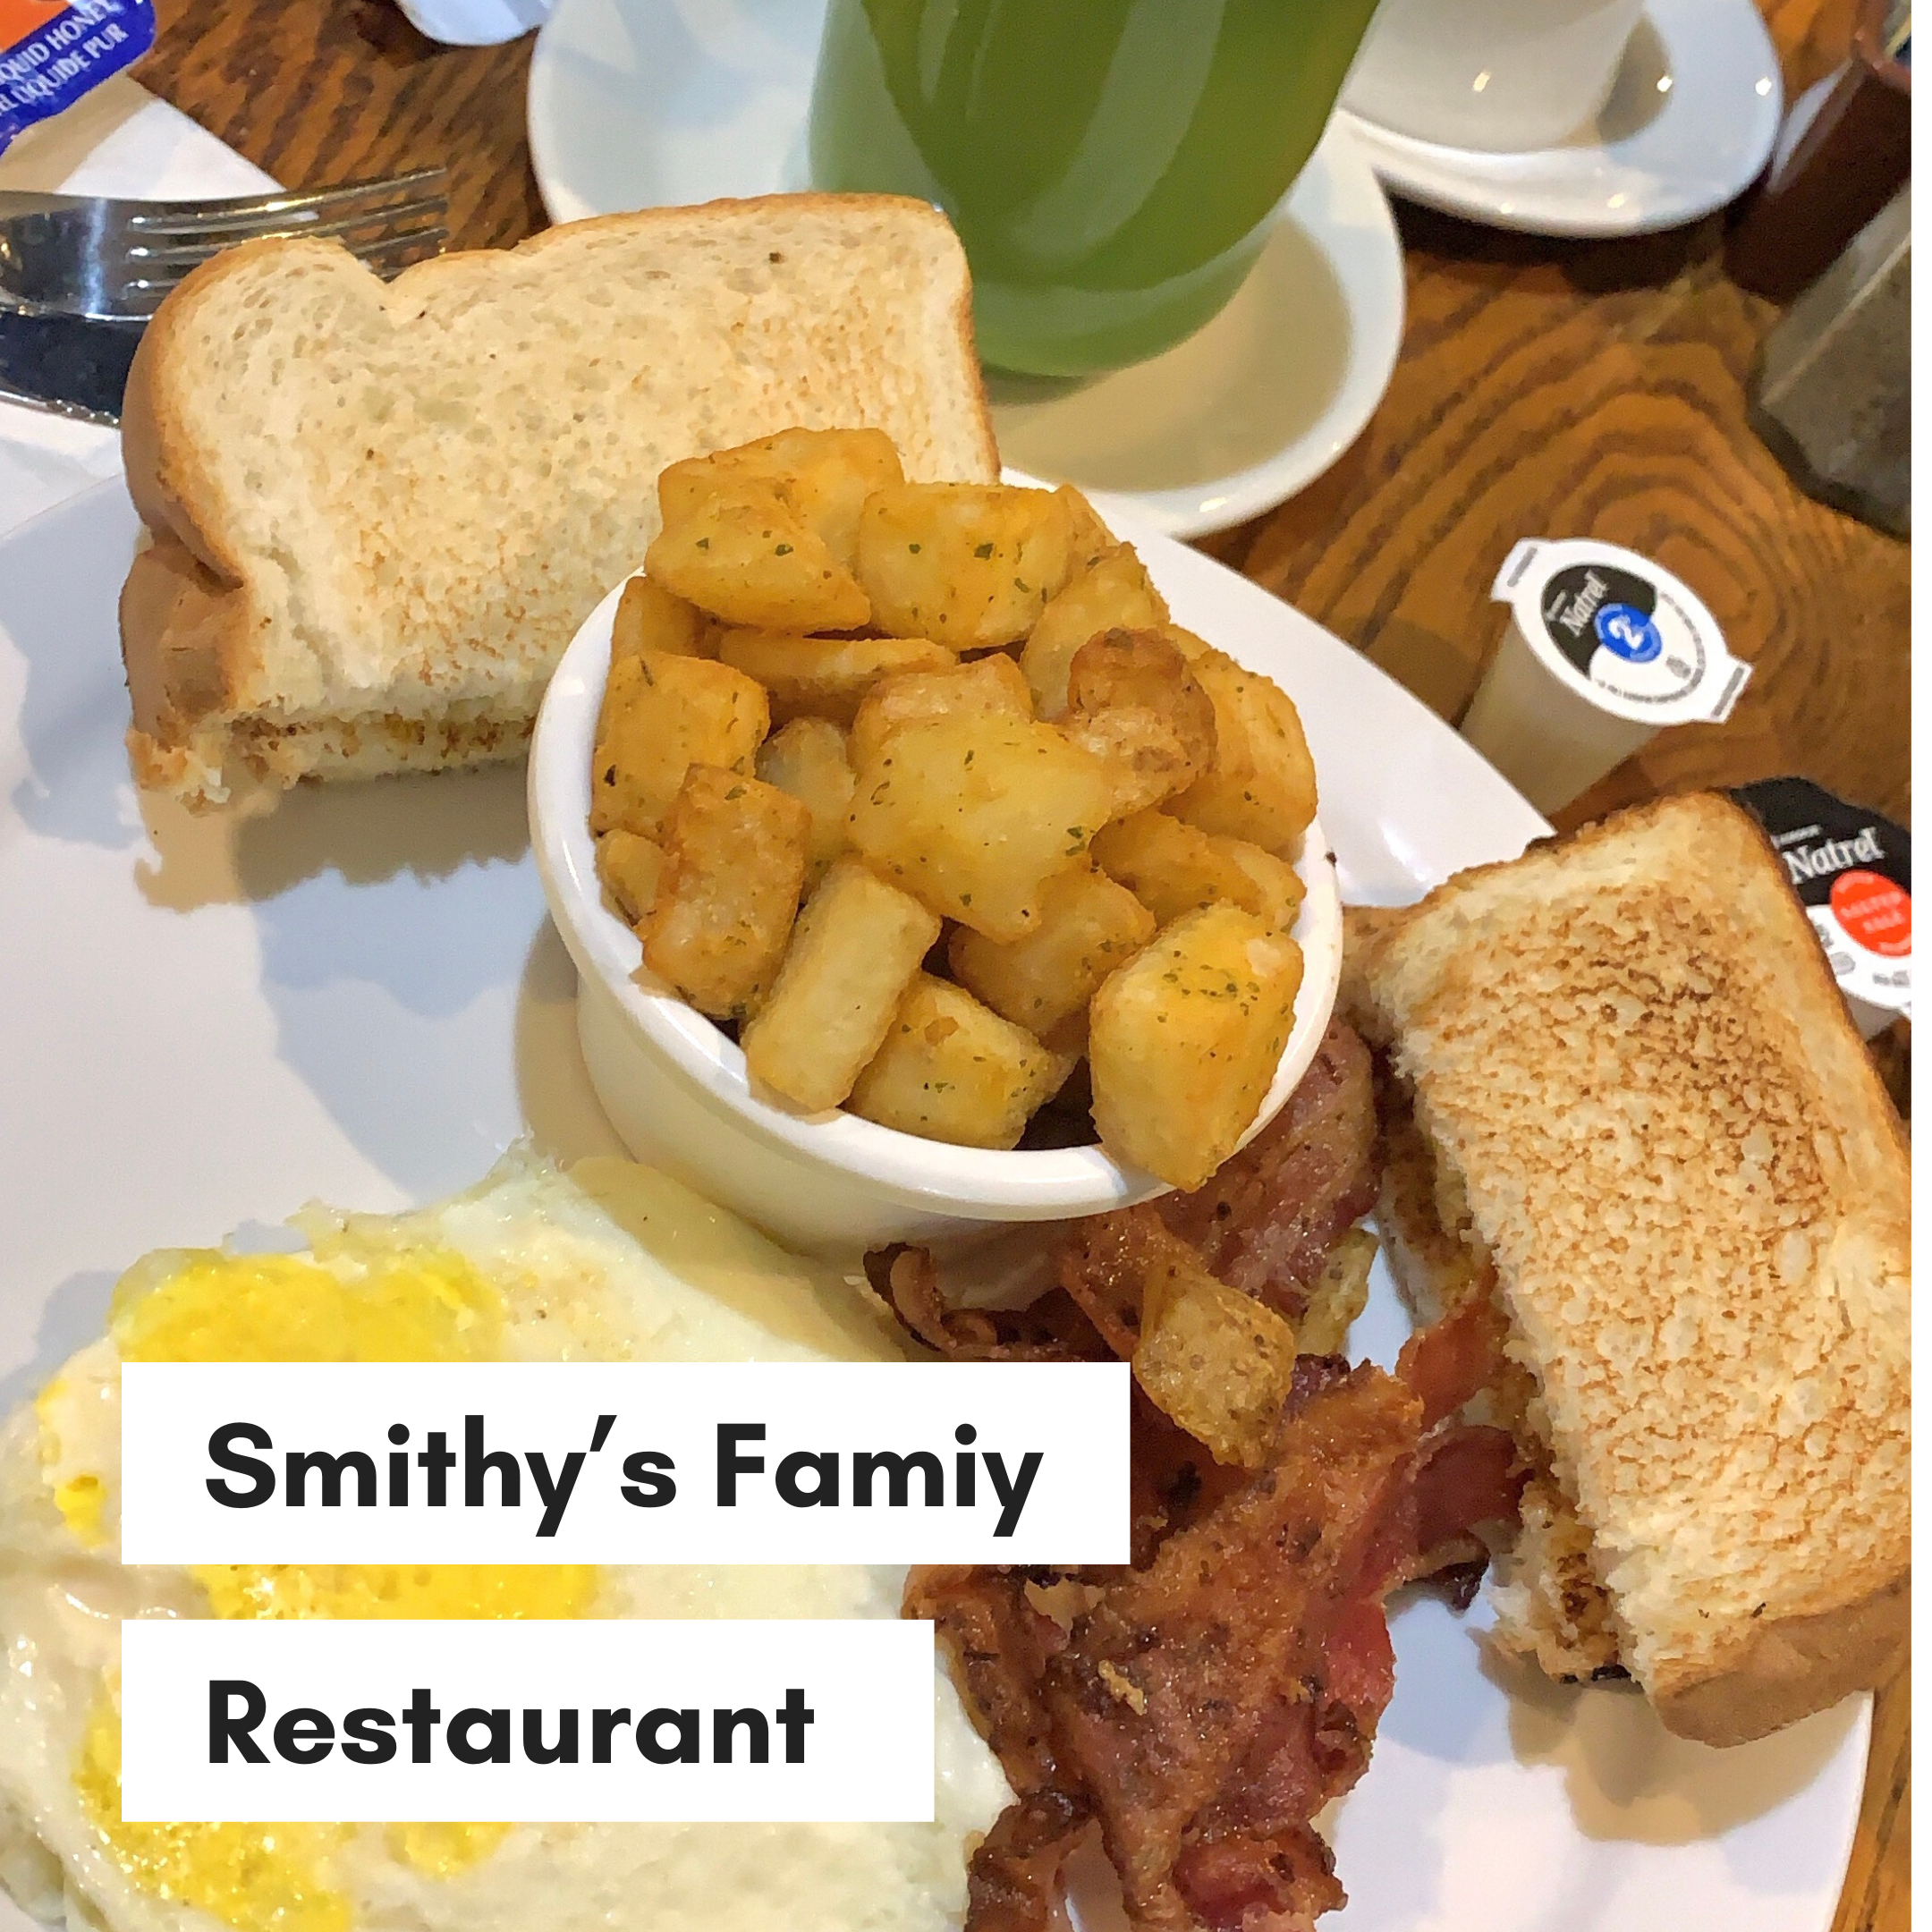 Where-to-eat-and-drink-halifax-Smithy’s-Famiy.